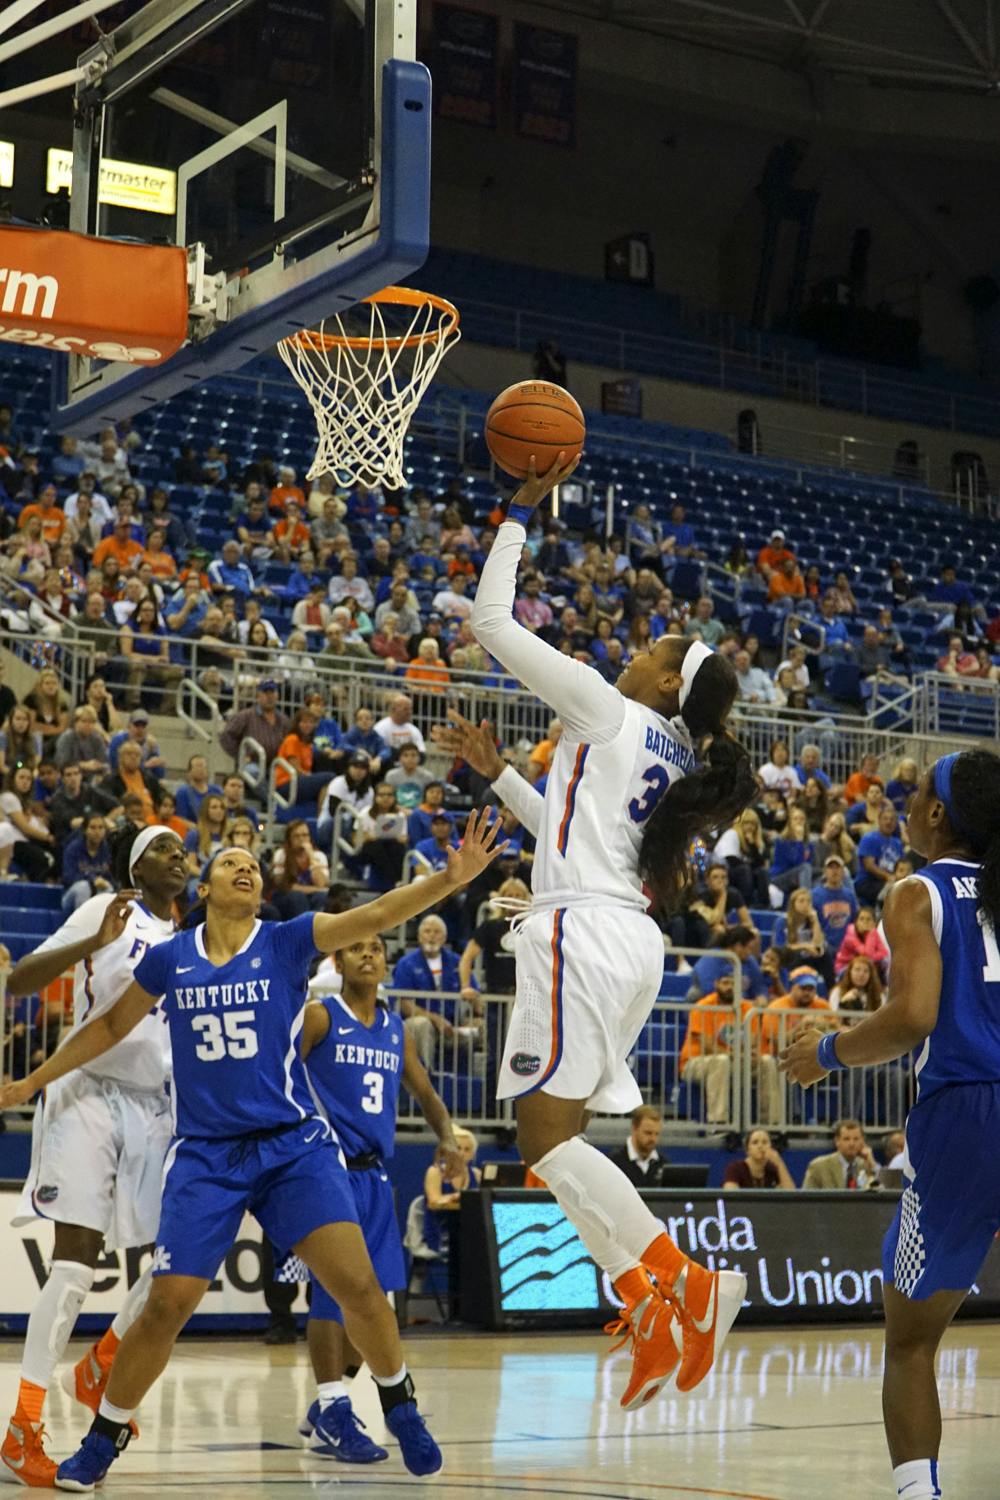 <p>Florida's Carla Batchelor attempts a layup during UF's 85-79 win over Kentucky on Jan. 31, 2016, in the O'Connell Center.</p>